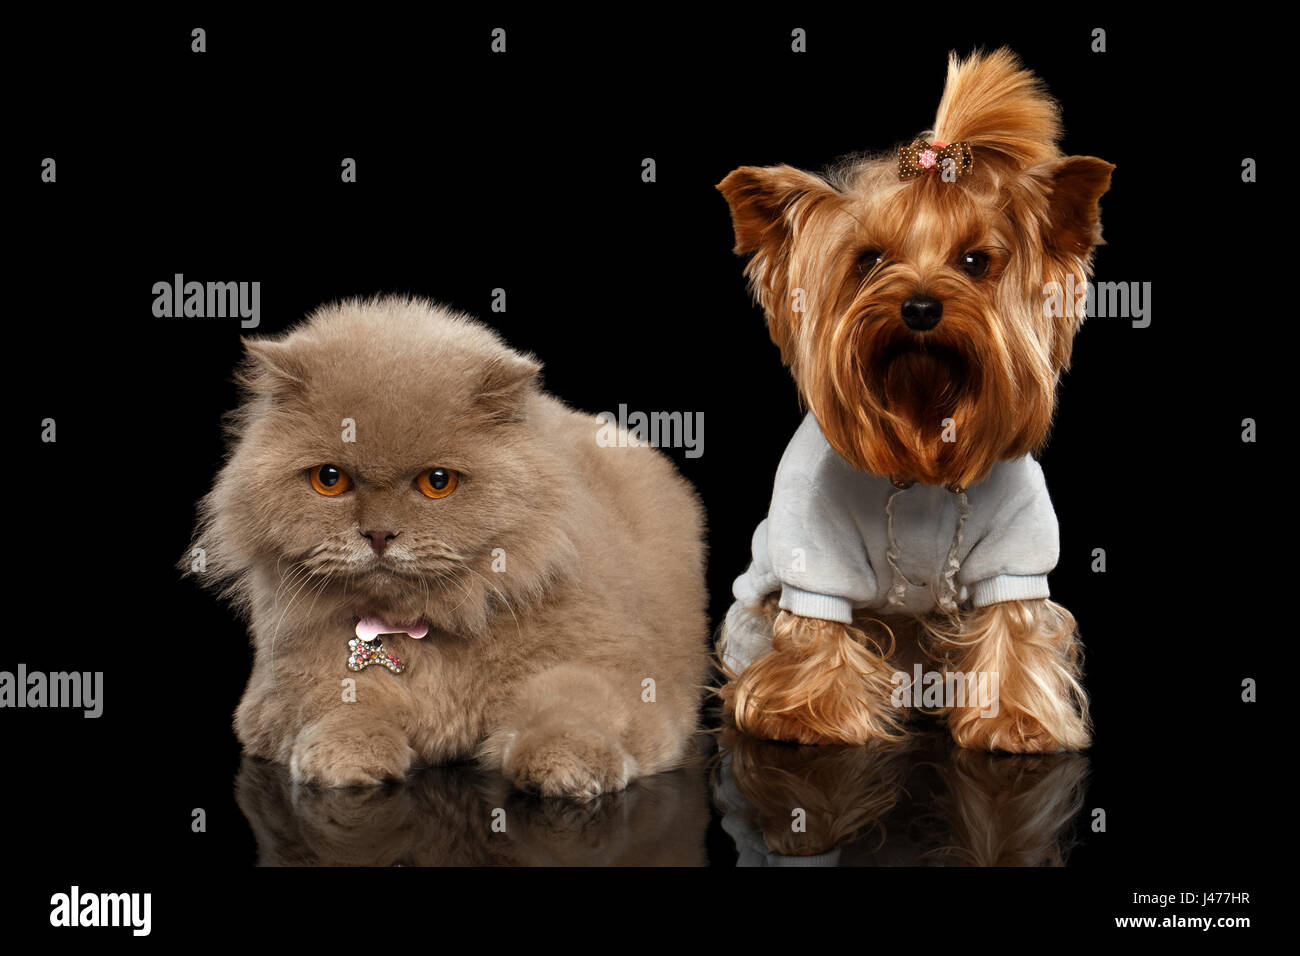 Scottish Cat and Yorkshire Terrier Dog Isolated Stock Photo